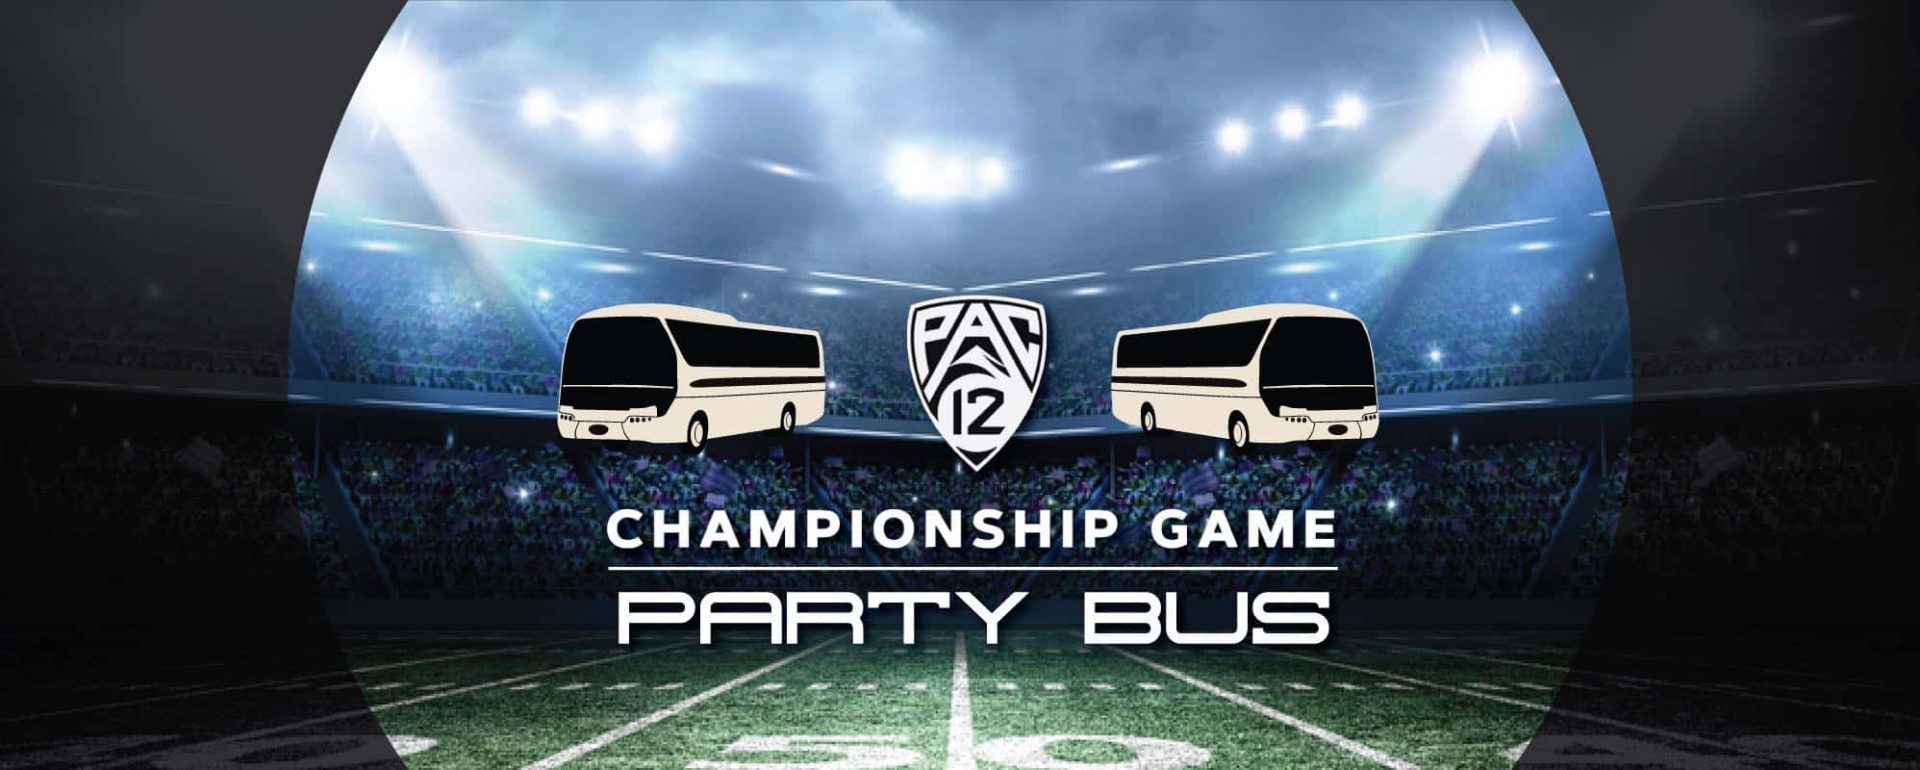 Pac 12 Championship Party Bus